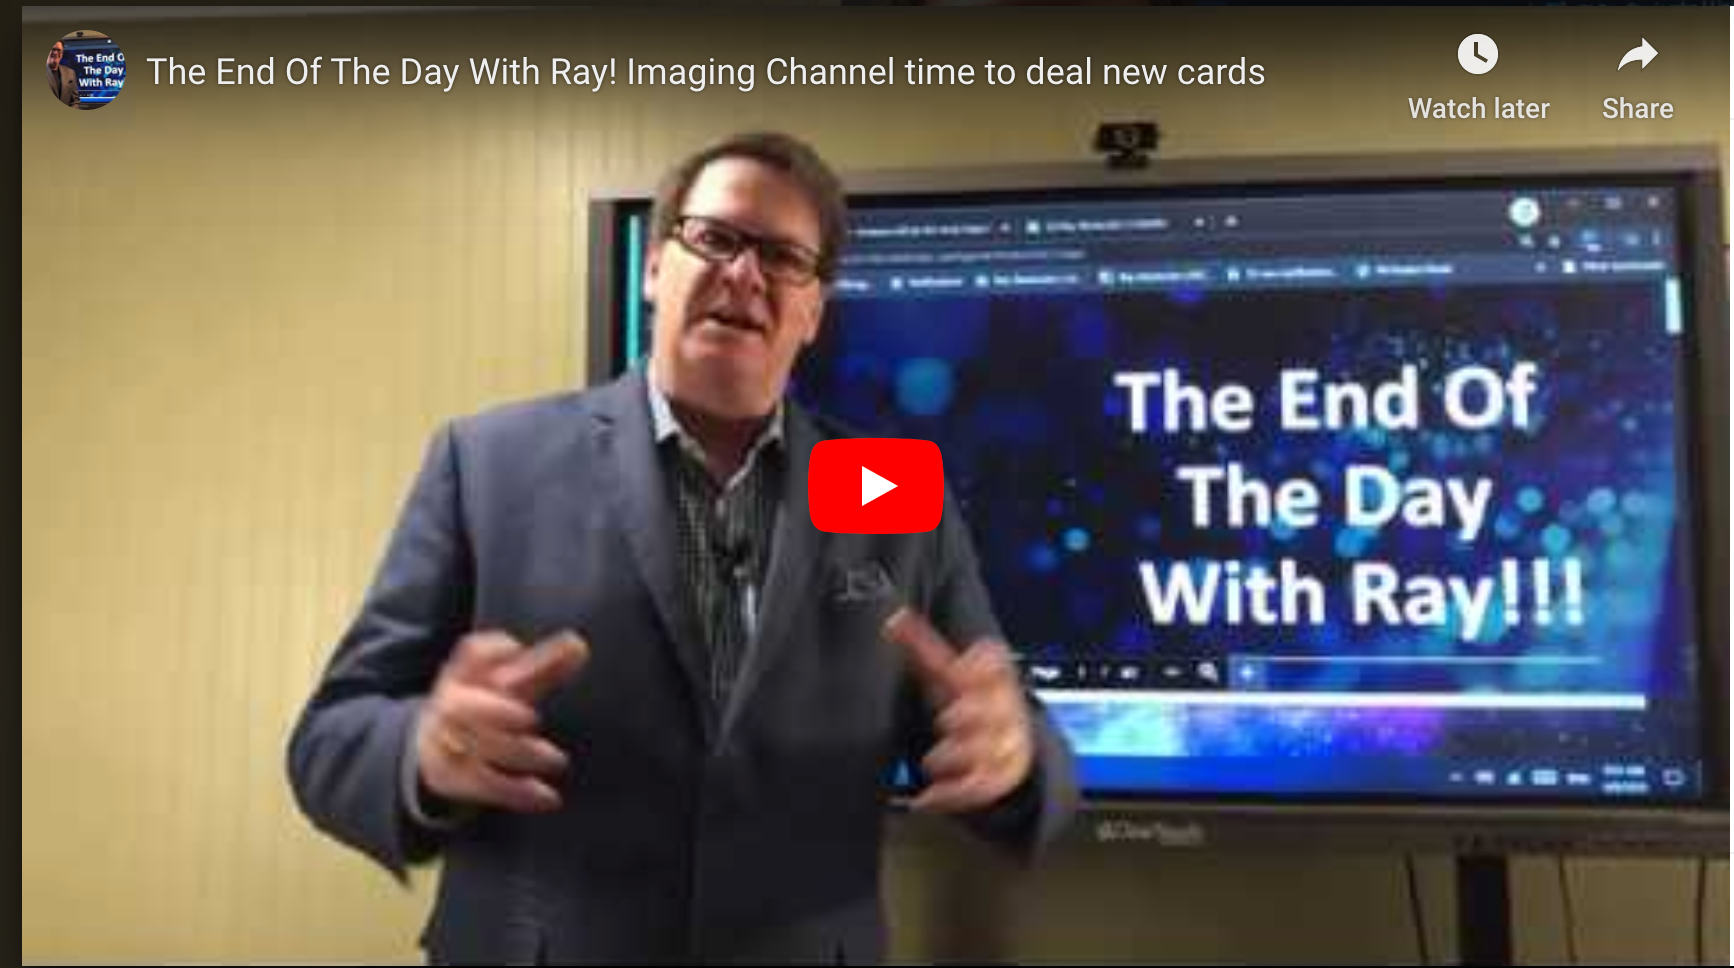 The End Of The Day With Ray! Imaging Channel time to deal new cards